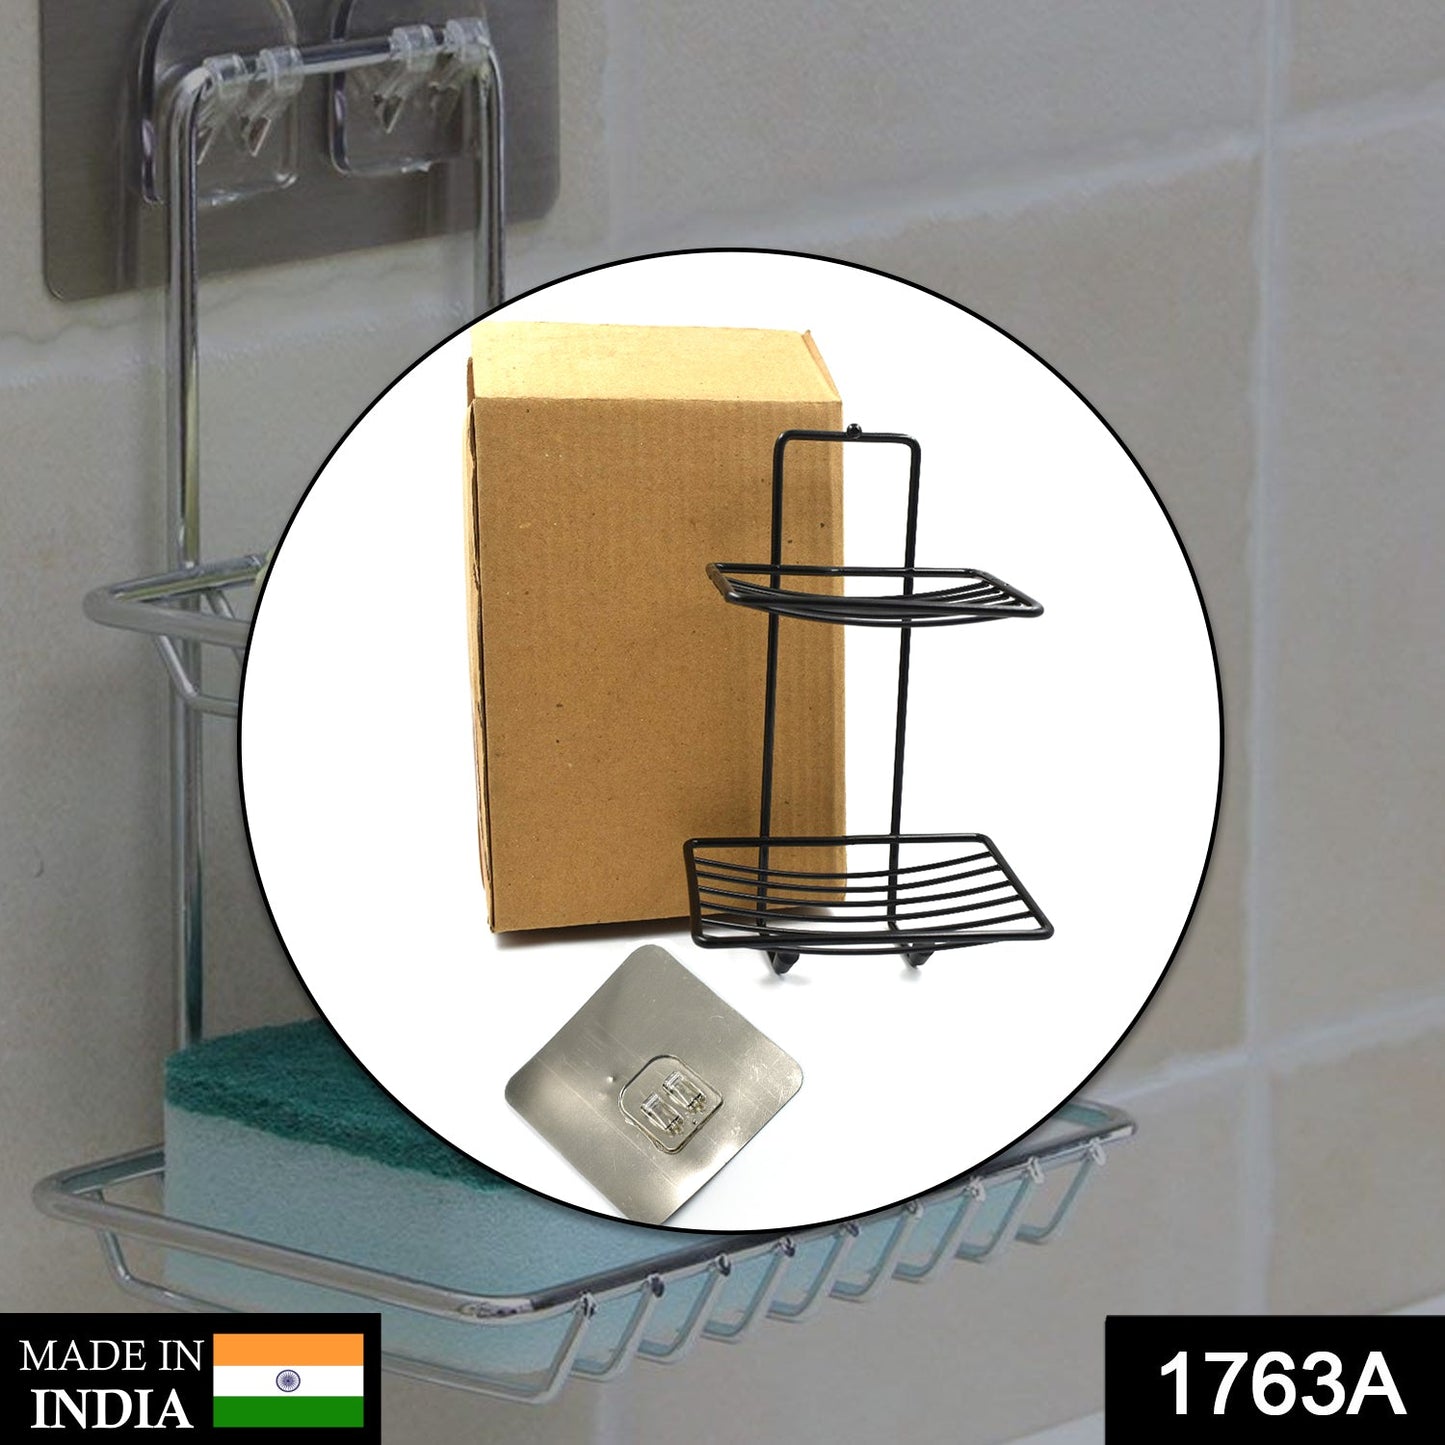 1763A 2 Layer SS Soap Rack used in all kinds of places household and bathroom purposes for holding soaps. - SWASTIK CREATIONS The Trend Point SWASTIK CREATIONS The Trend Point